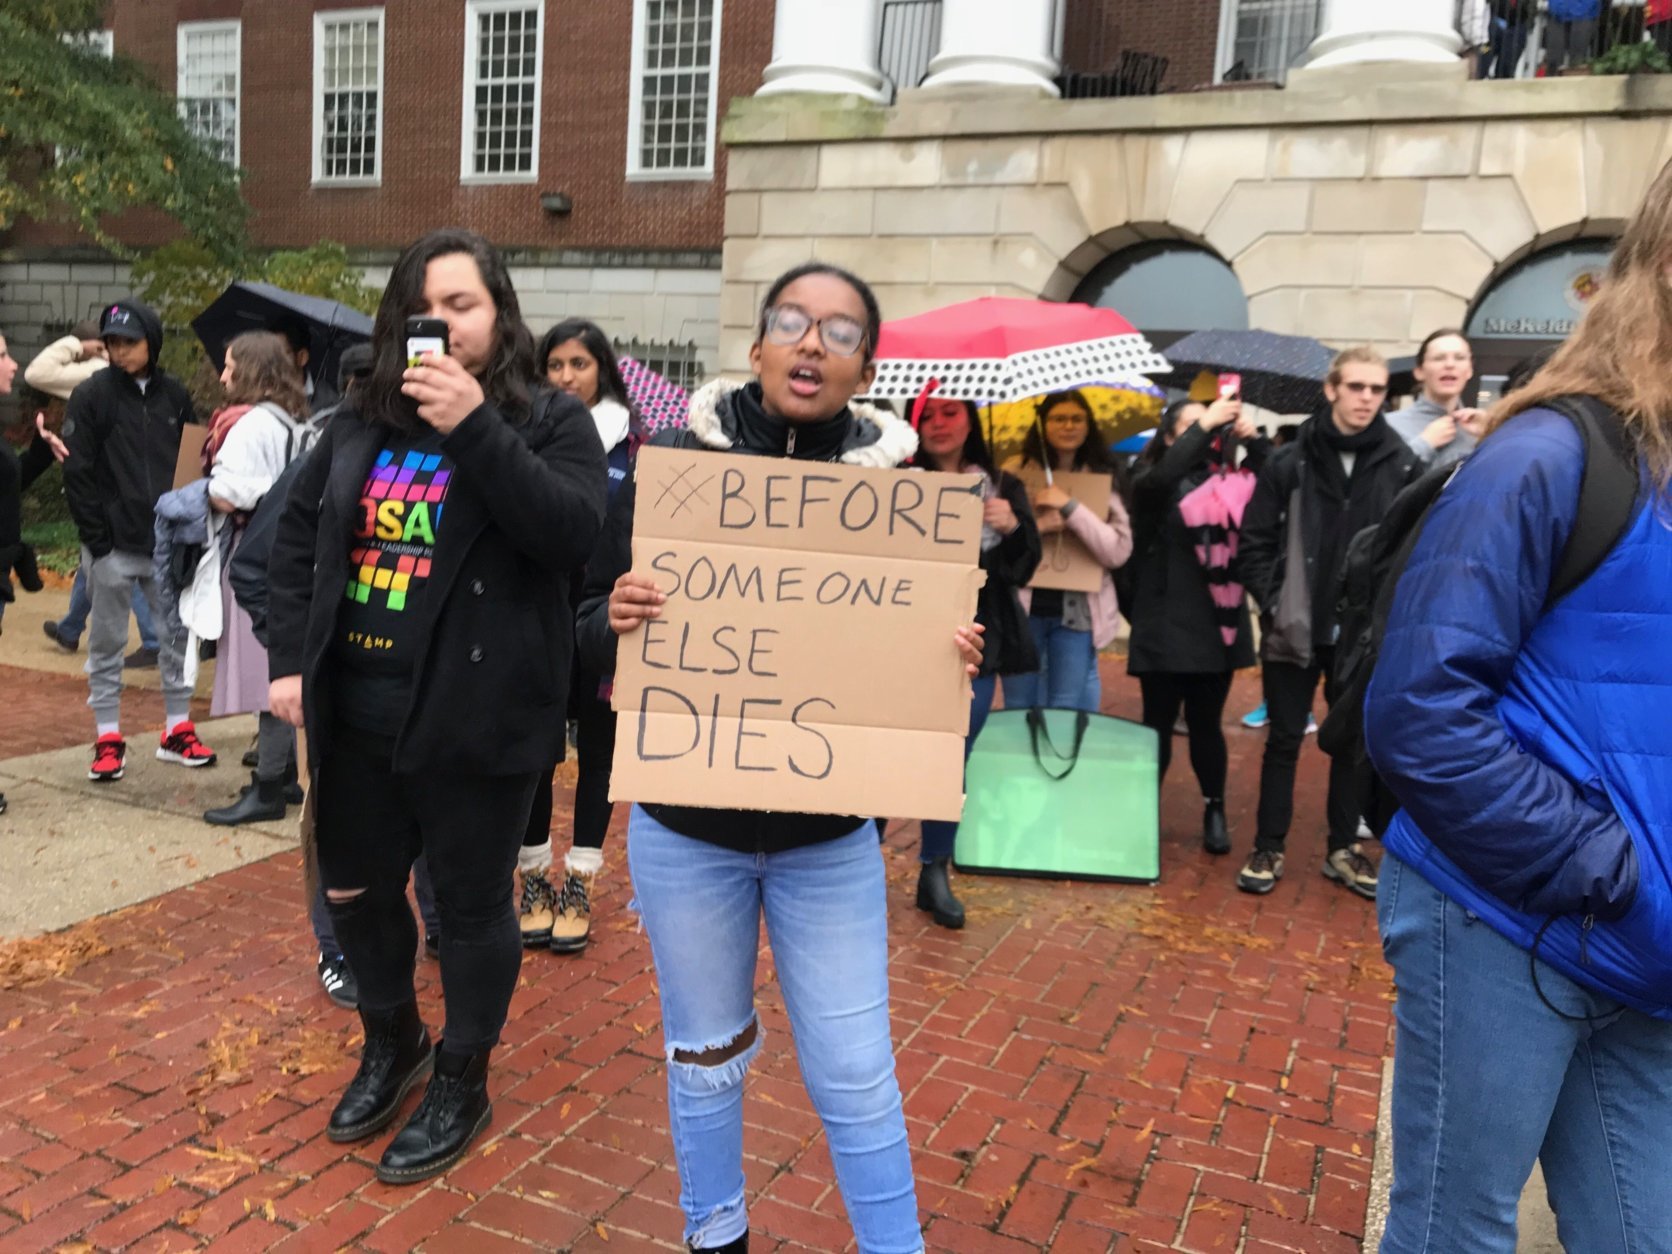 A small group of demonstrators rallied demanding institutional changes following the death of student-athlete Jordan McNair. (WTOP/Dick Uliano)